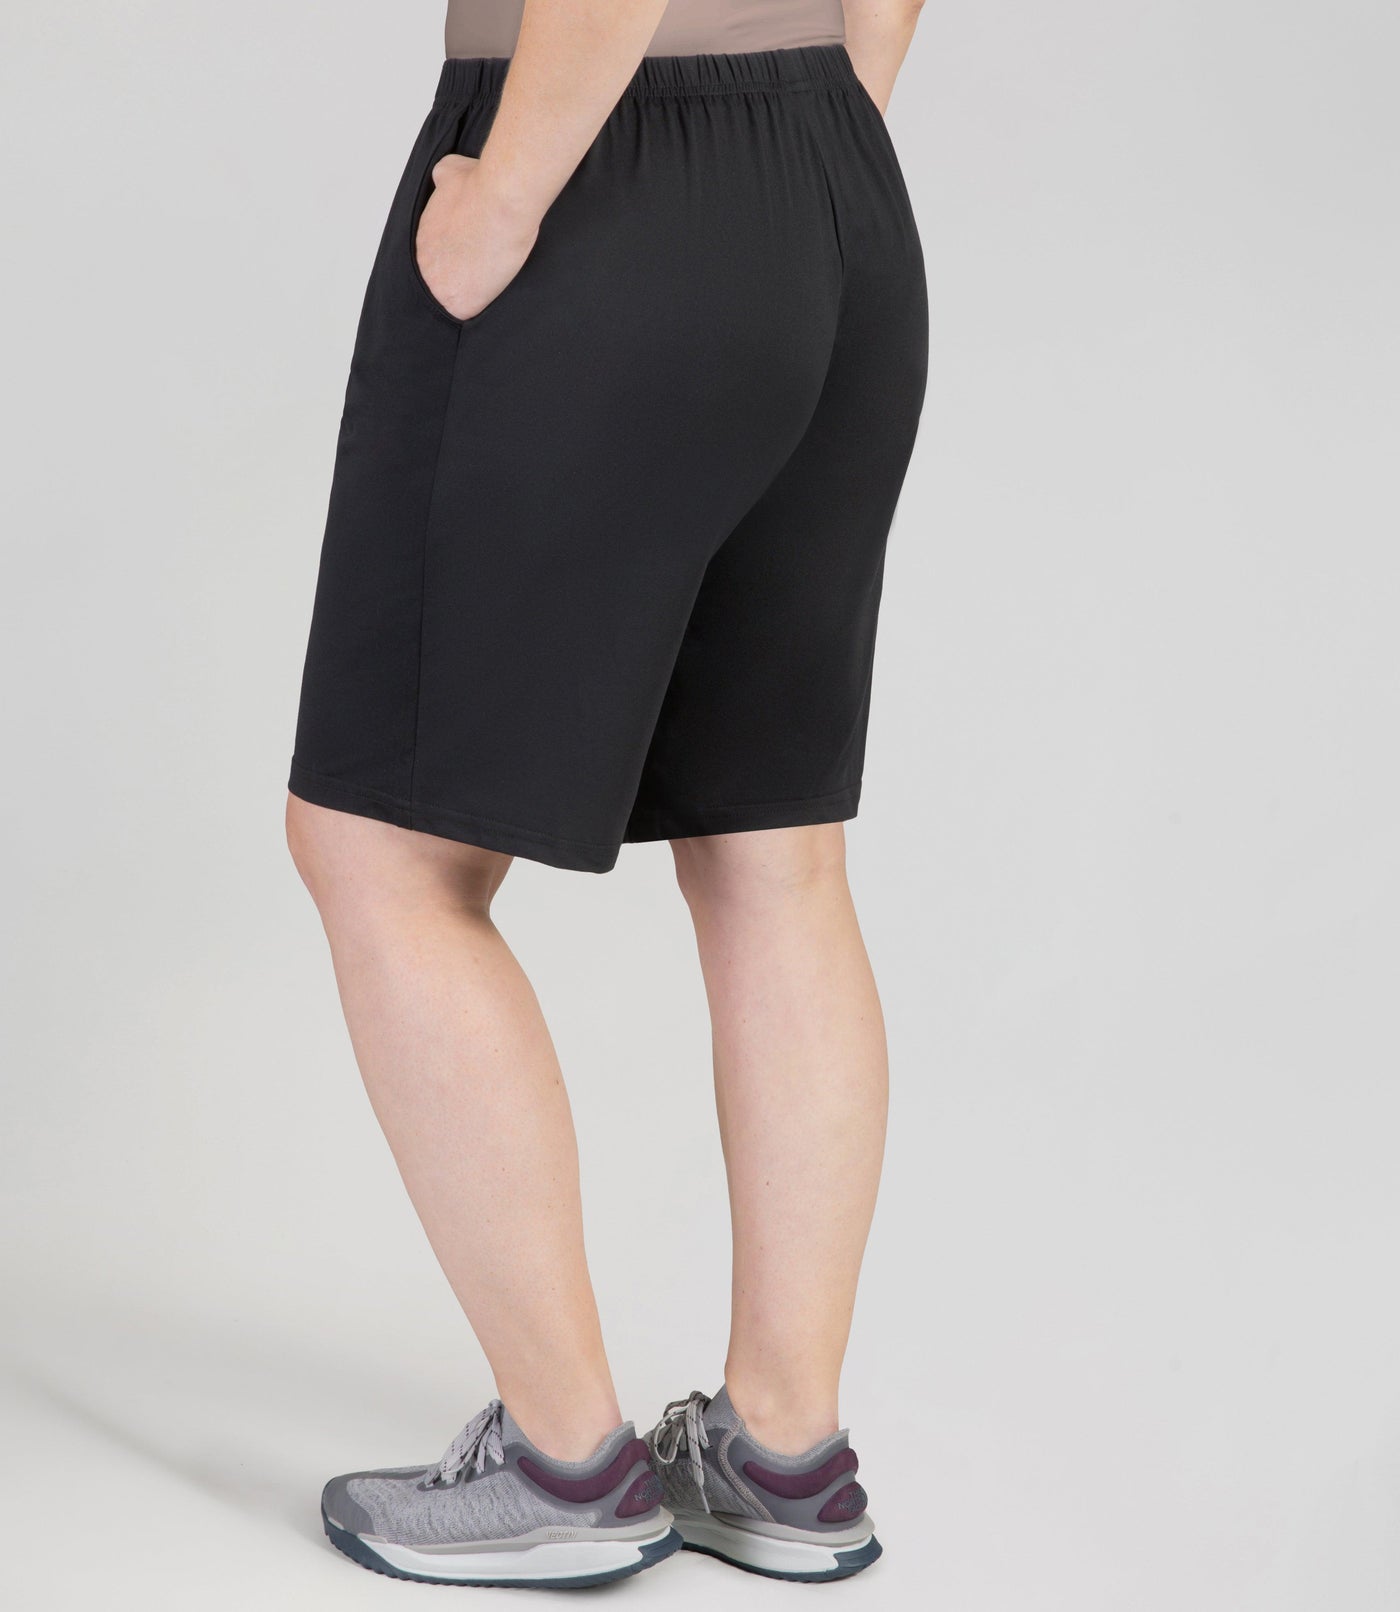 Bottom half of plus sized woman, back view, wearing JunoActive Softwik Relaxed Fit Shorts with pockets in color black. Bottom hem is about an inch above the knee.